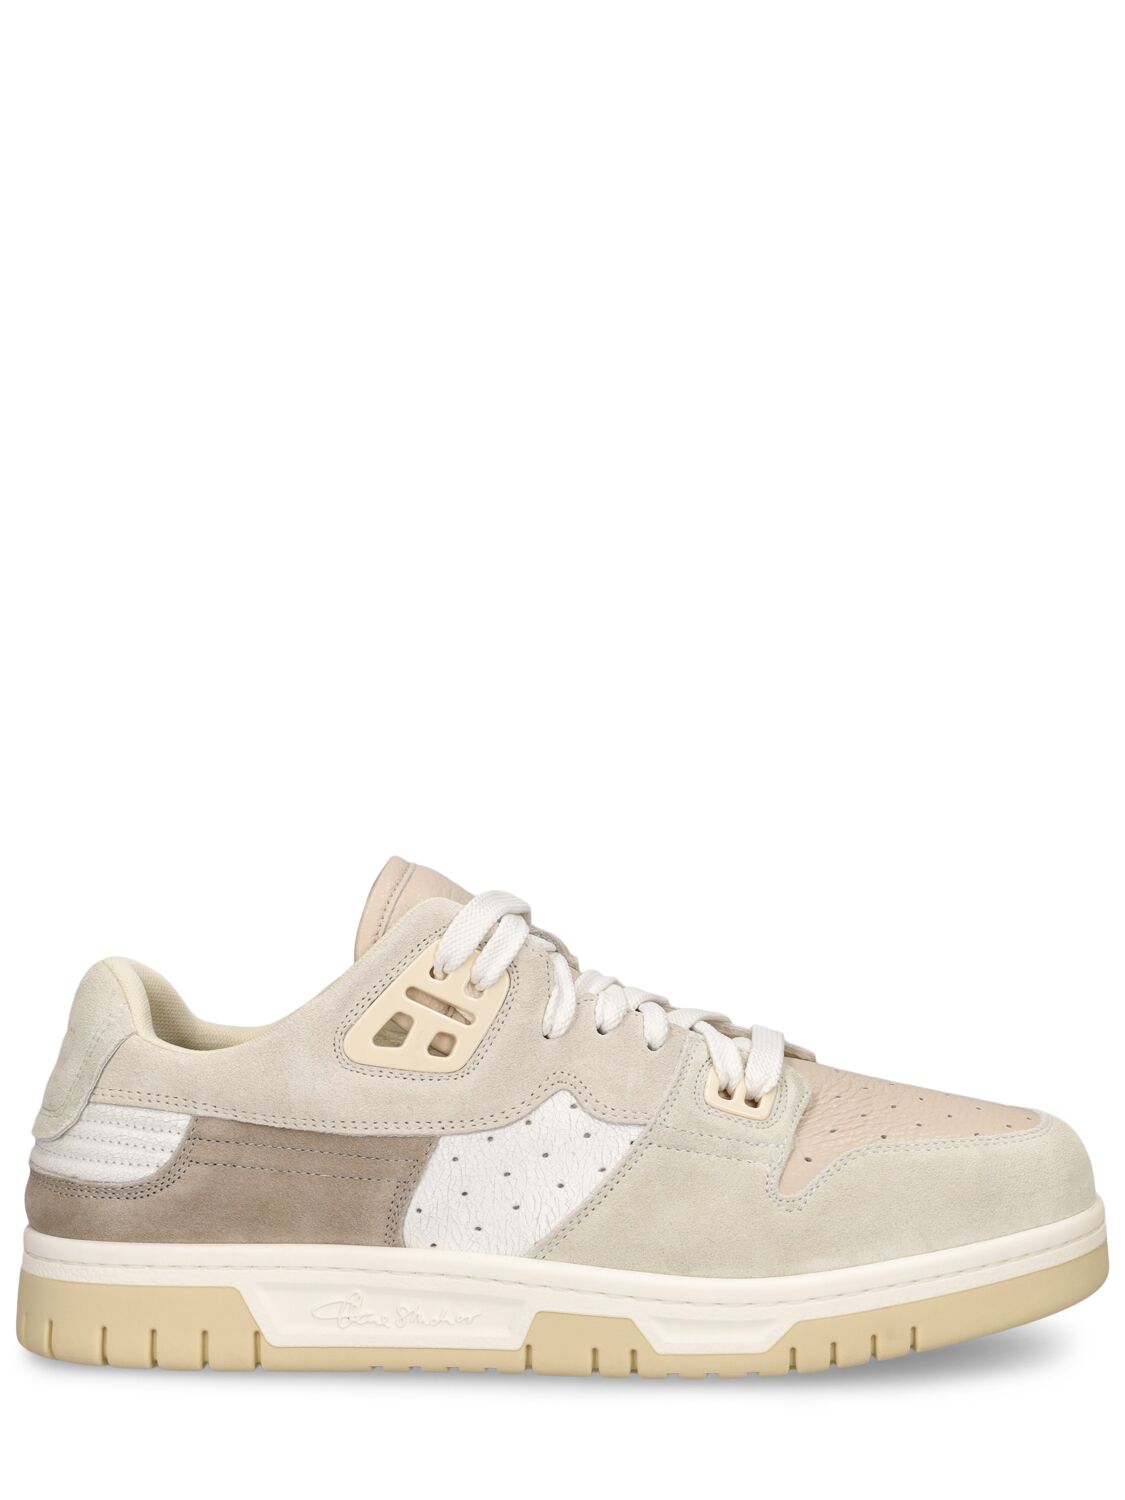 Image of 08sthlm Leather Low Top Sneakers